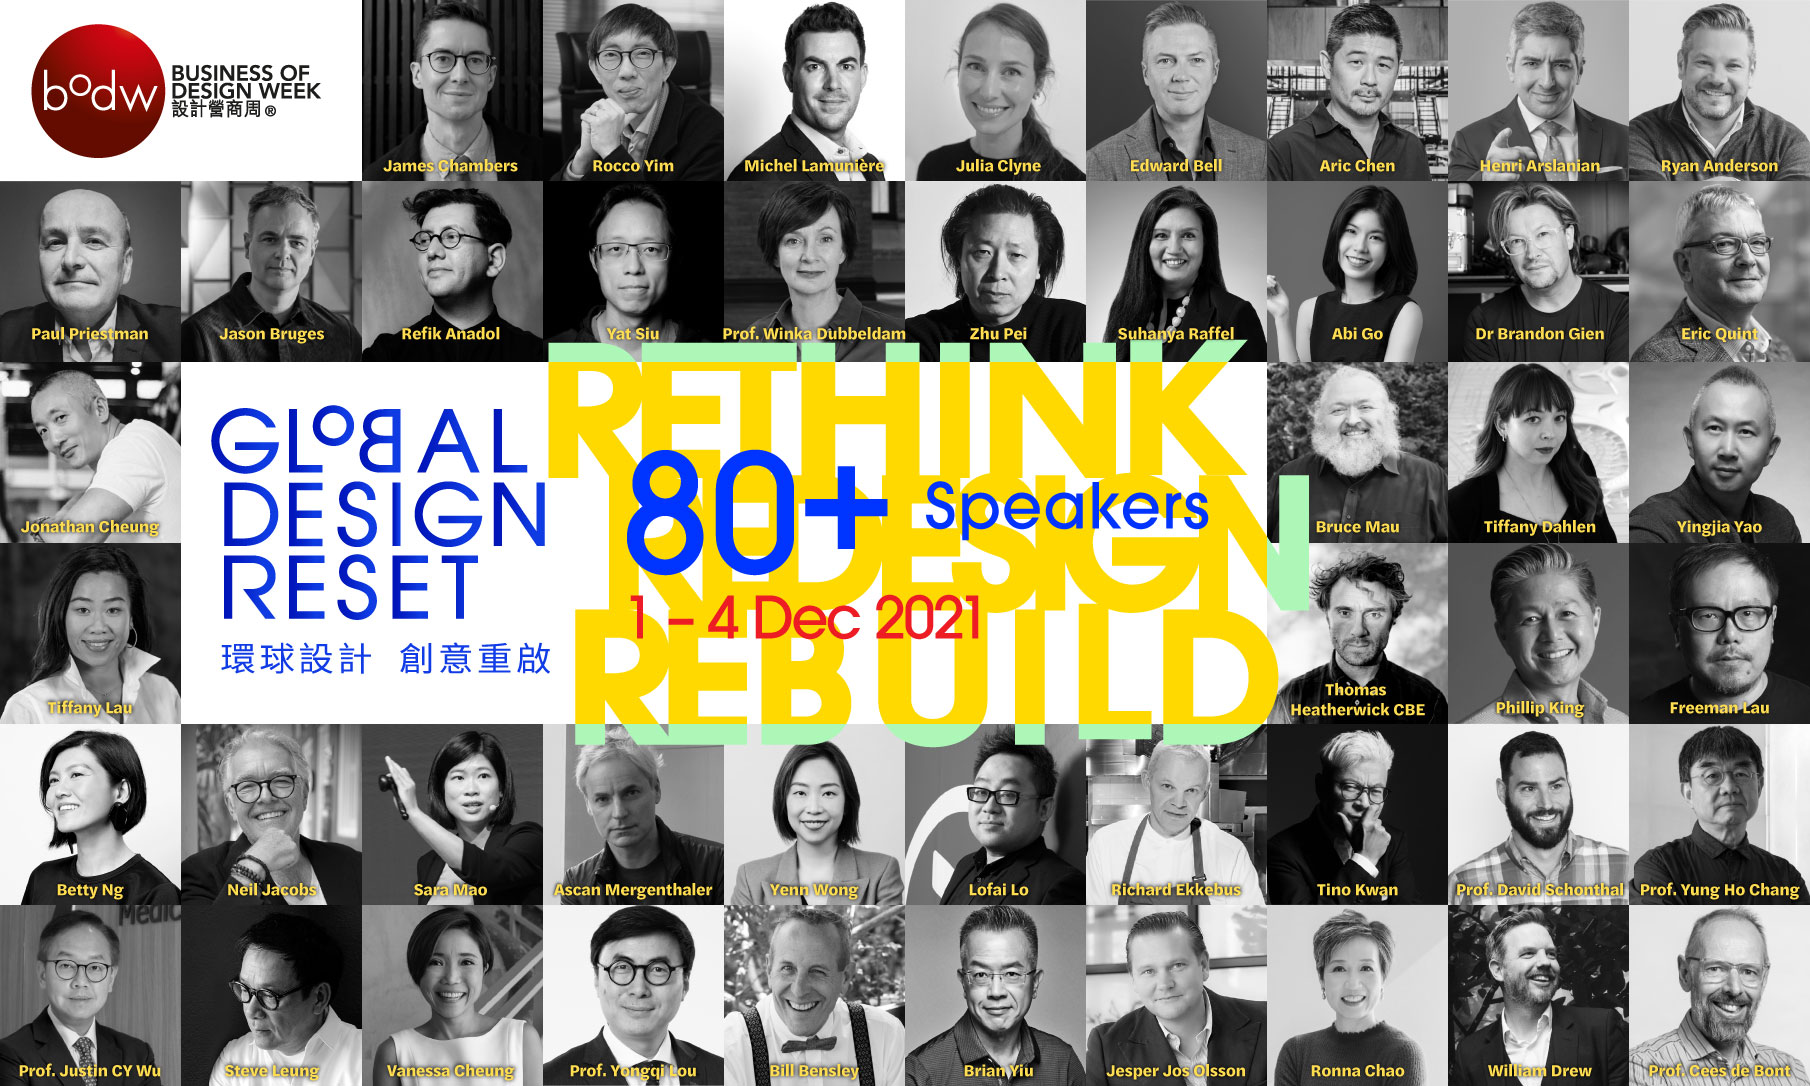 At ‘Global Design Reset,’ Business of Design Week 2021 - Centres on Moving Forward and Building a Better Post-Pandemic World